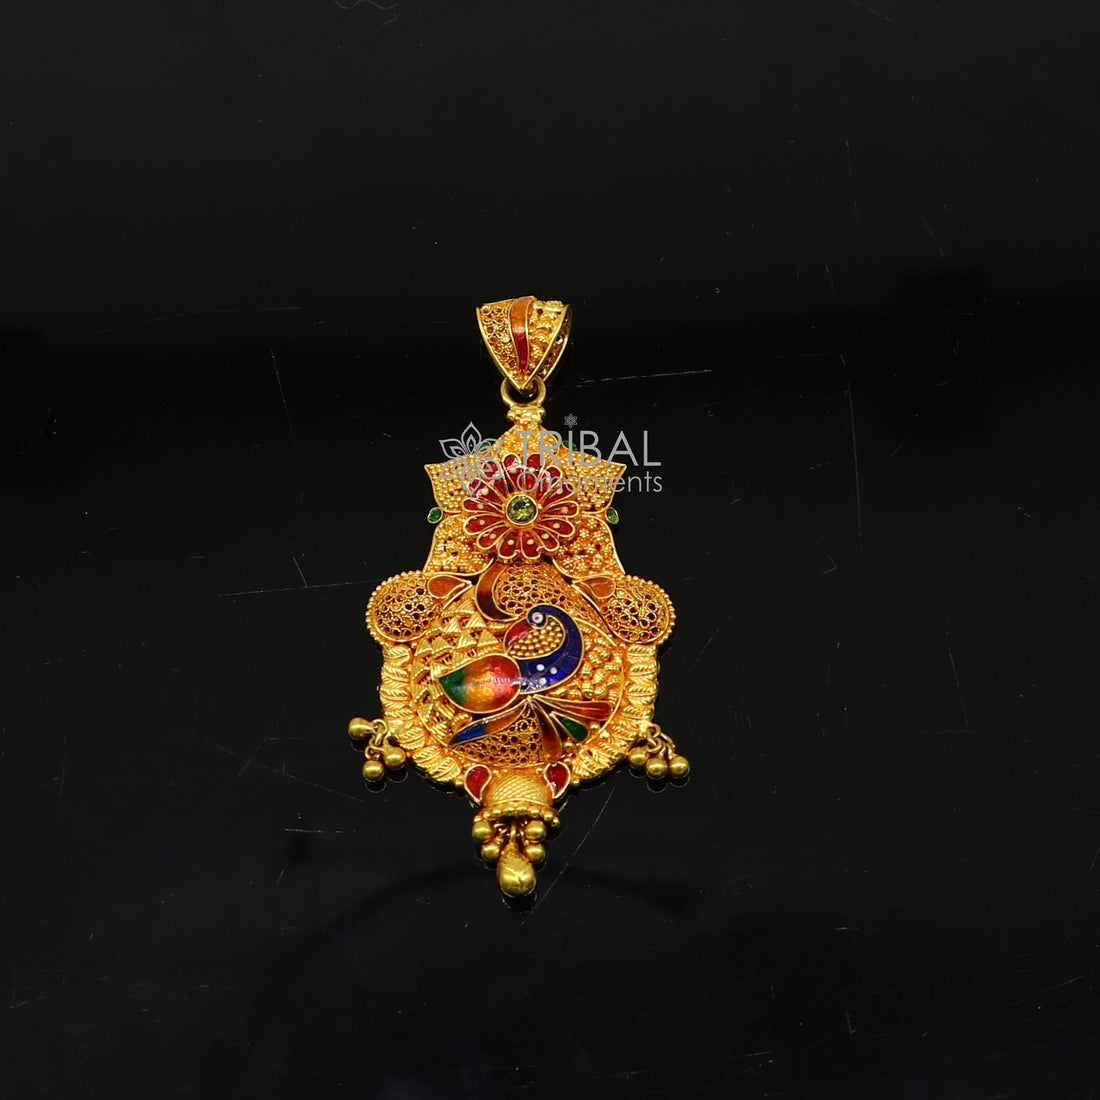 Peacock design Traditional cultural filigree work trendy 22kt yellow gold functional pendant, amazing ethnic brides pendant jewelry gp26 - TRIBAL ORNAMENTS